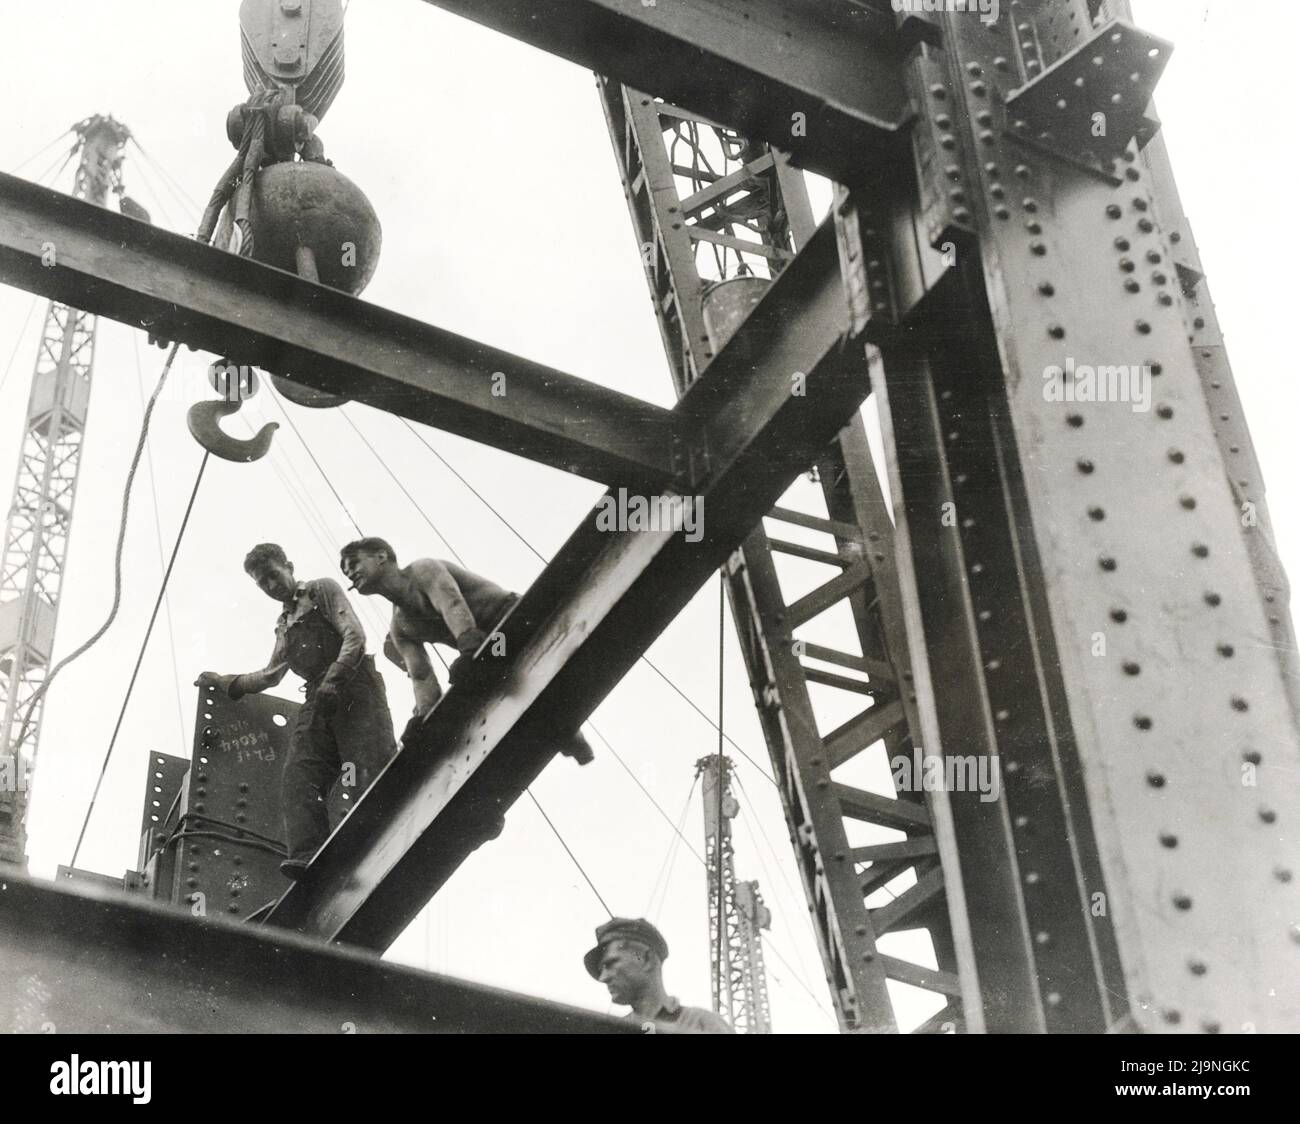 Lewis Hine - Construction Photography - Empire State Building Girders and Workers Stock Photo